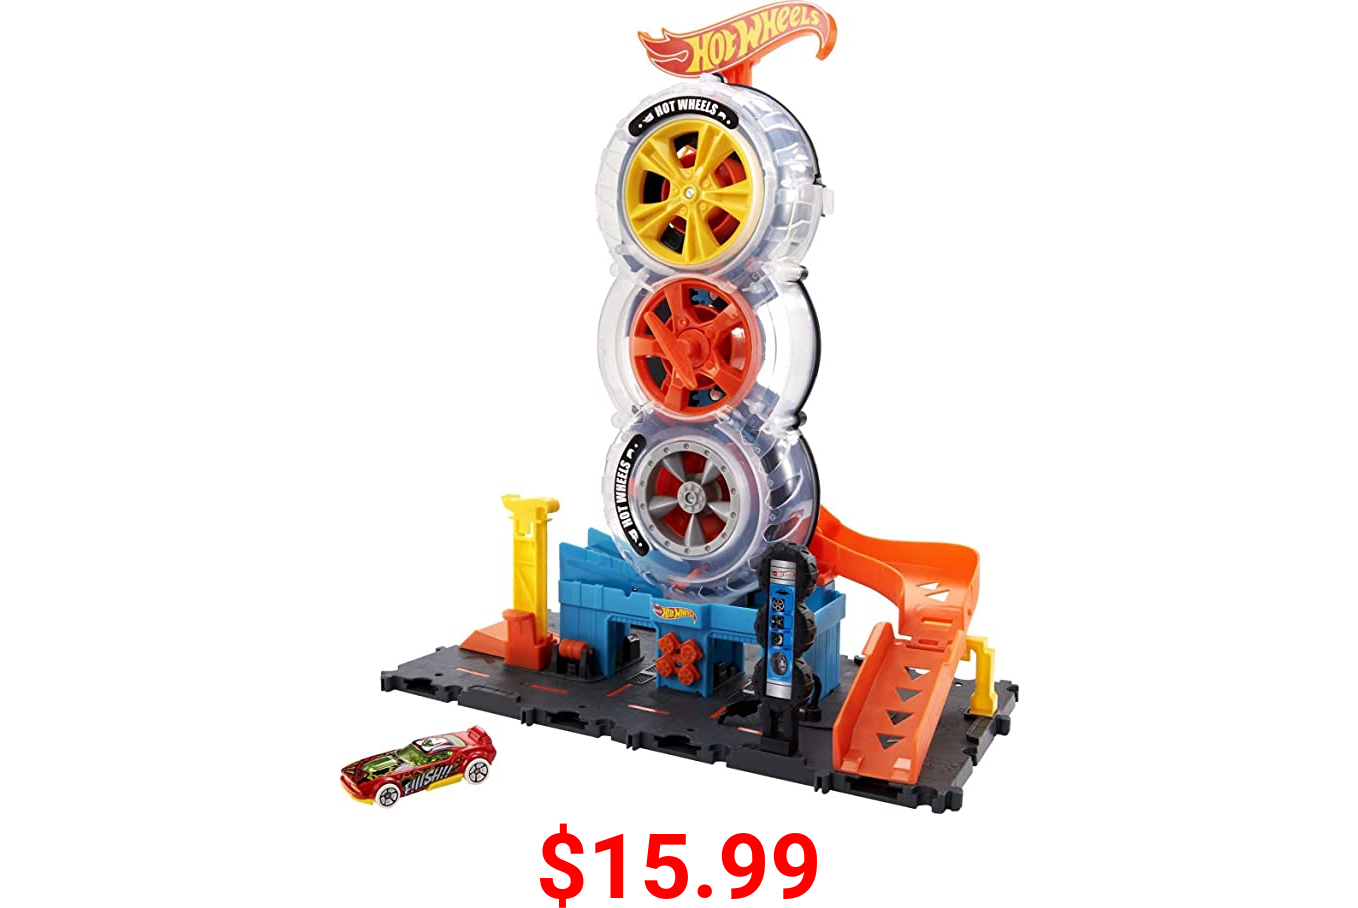 Hot Wheels City Super Twist Tire Shop Playset, Spin The Key to Make Cars Travel Through The Tires, Includes 1 Car, Gift for Kids 4 to 8 Years Old